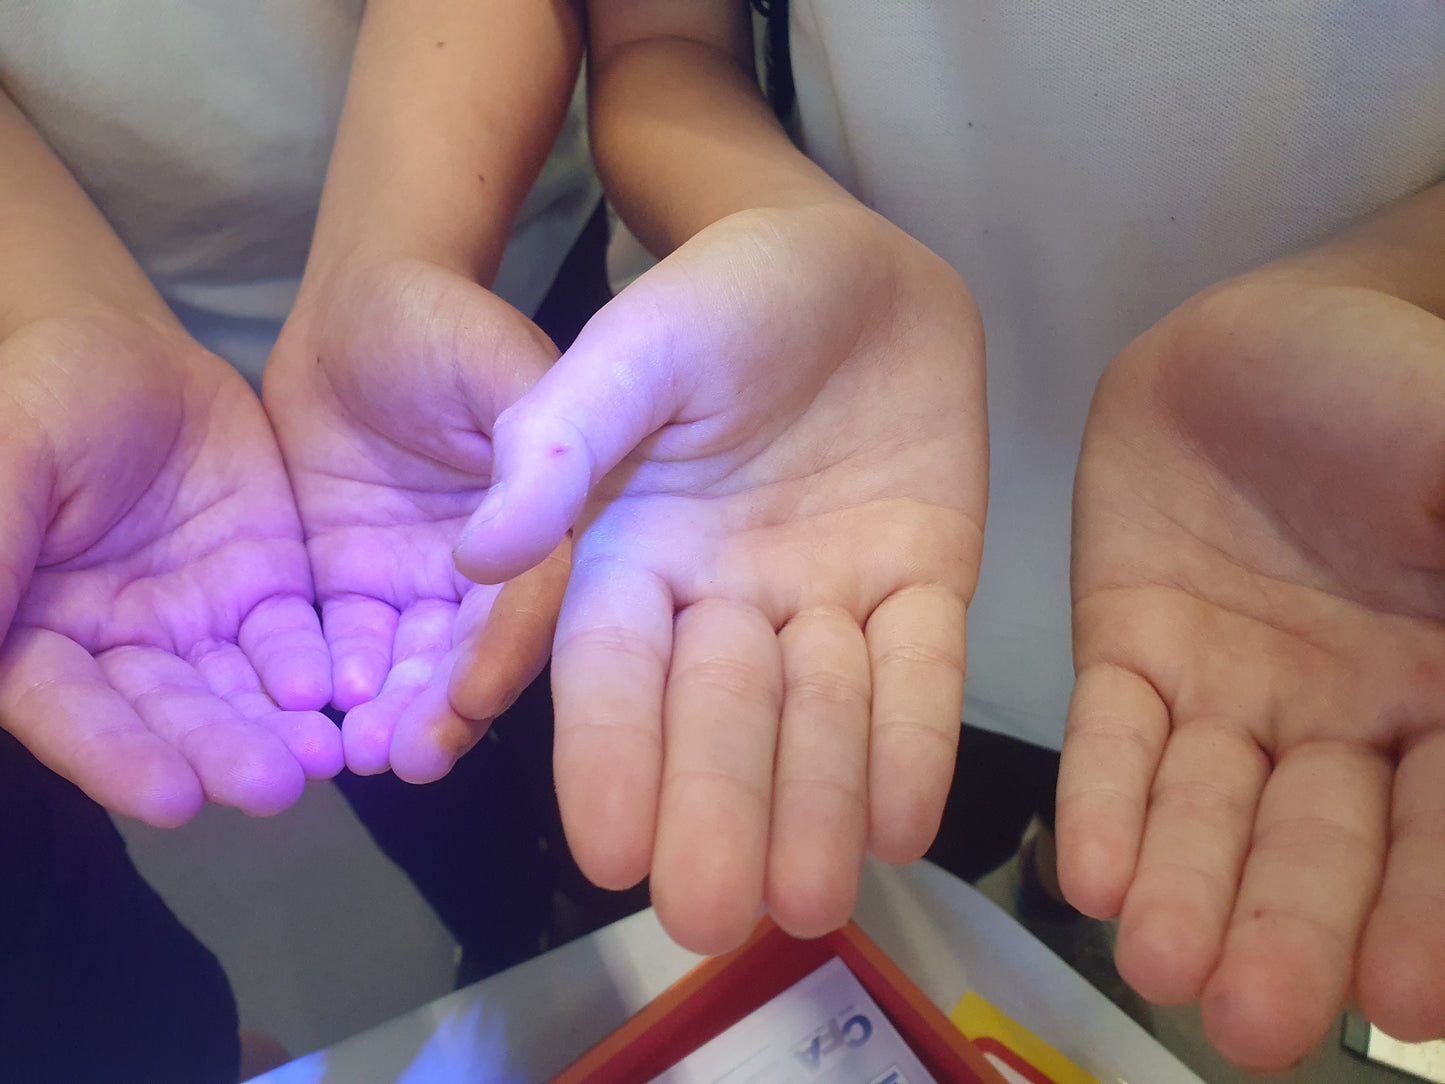 Using Glo Germ and UV torches to demonstrate handwashing